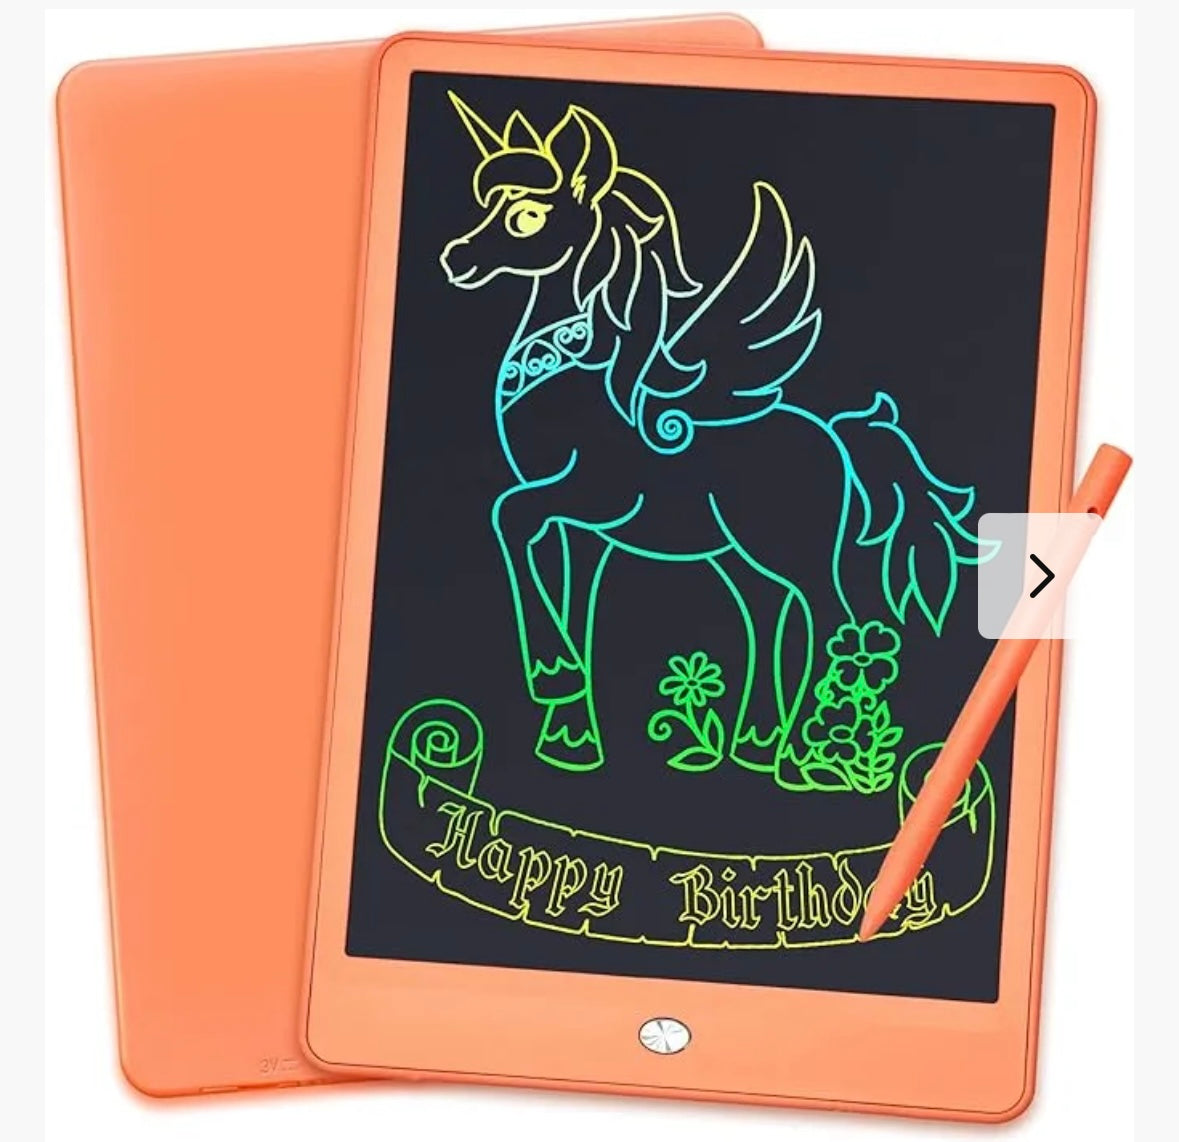 10" Colorful LCD Writing Tablet Doodle Board, Spark Your Creativity - Save Paper!